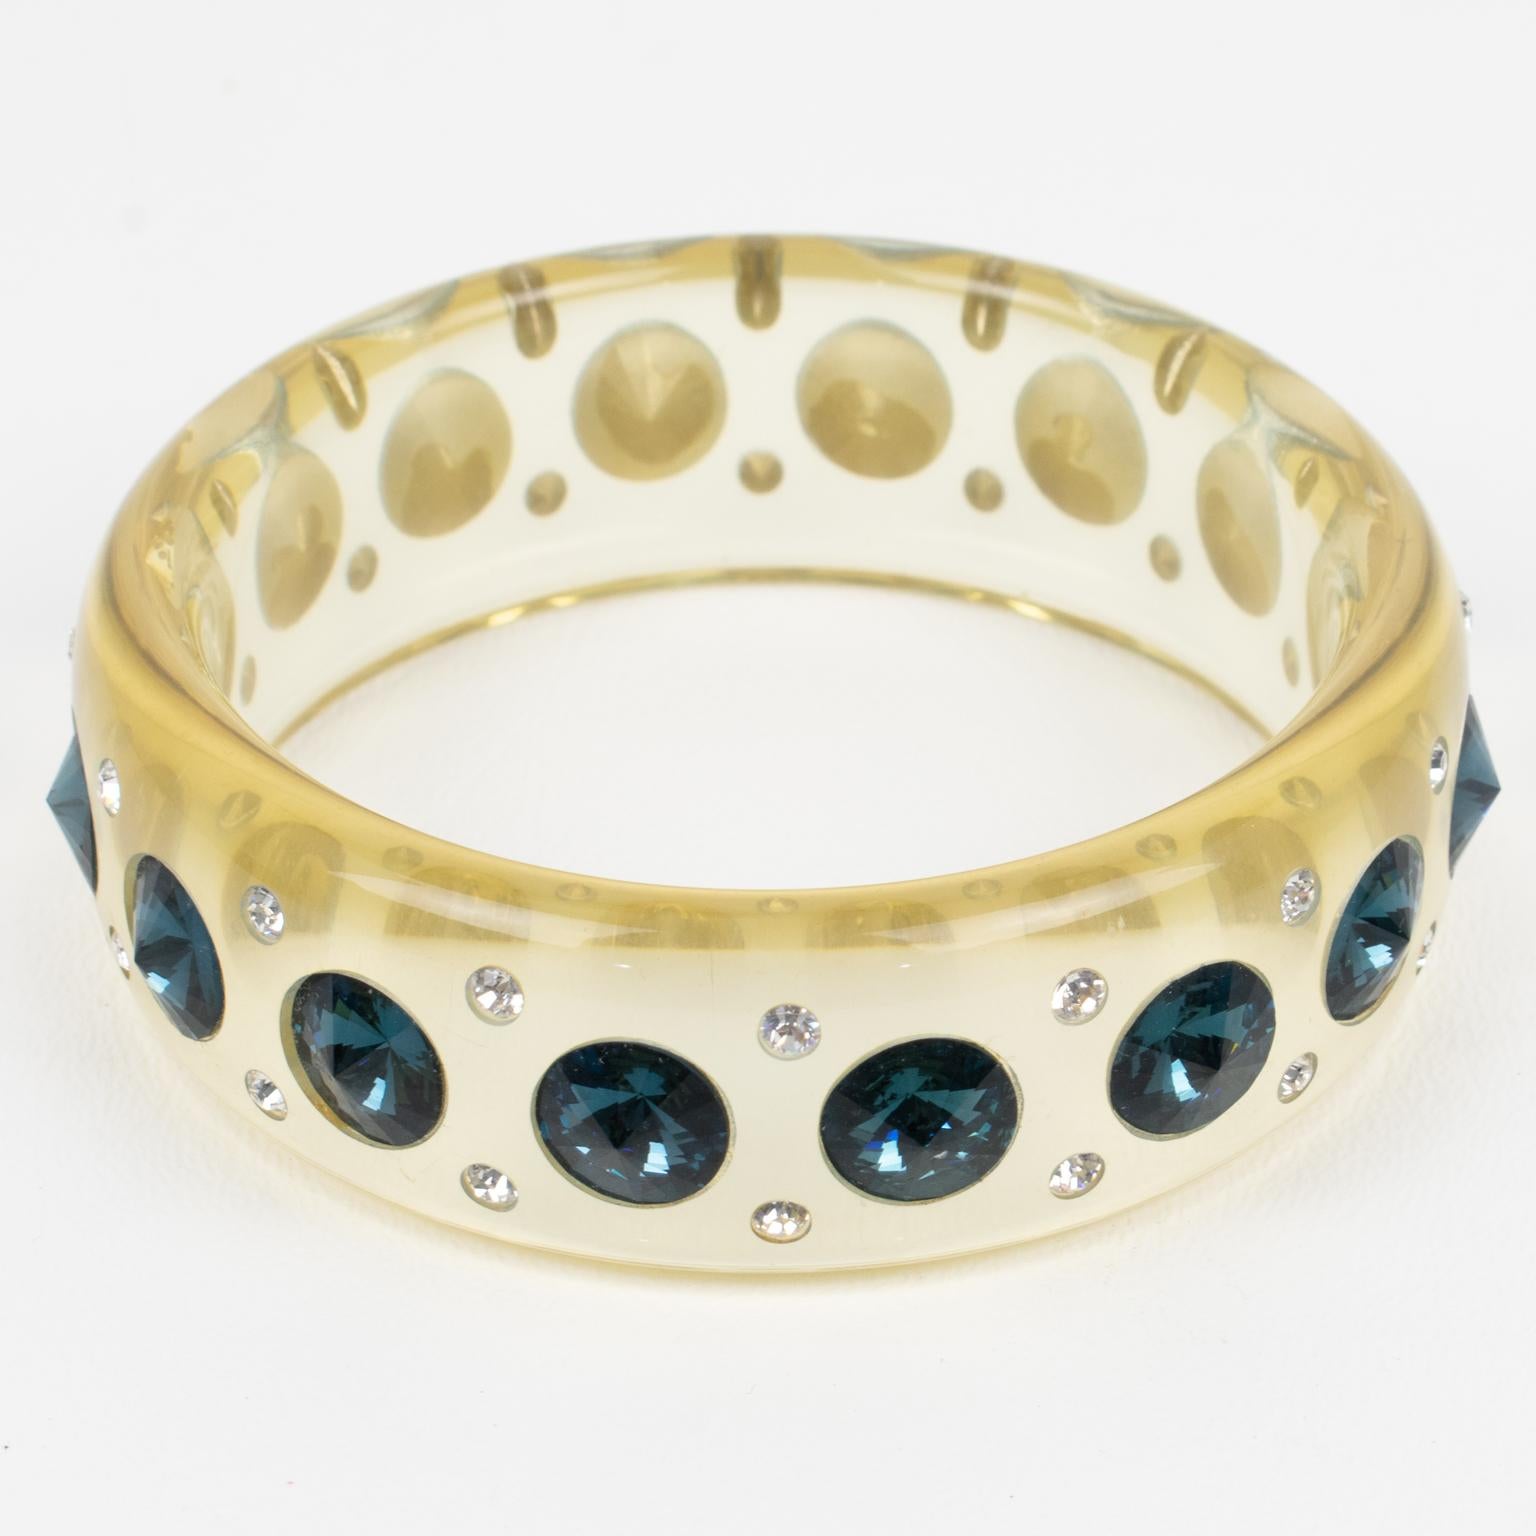 This superb Lucite bracelet bangle features a domed shape in a transparent pale yellow color. The bangle is ornate with massive denim blue crystal rhinestones and tiny silver ones. There is no visible maker's mark.
Measurements: Inside across is